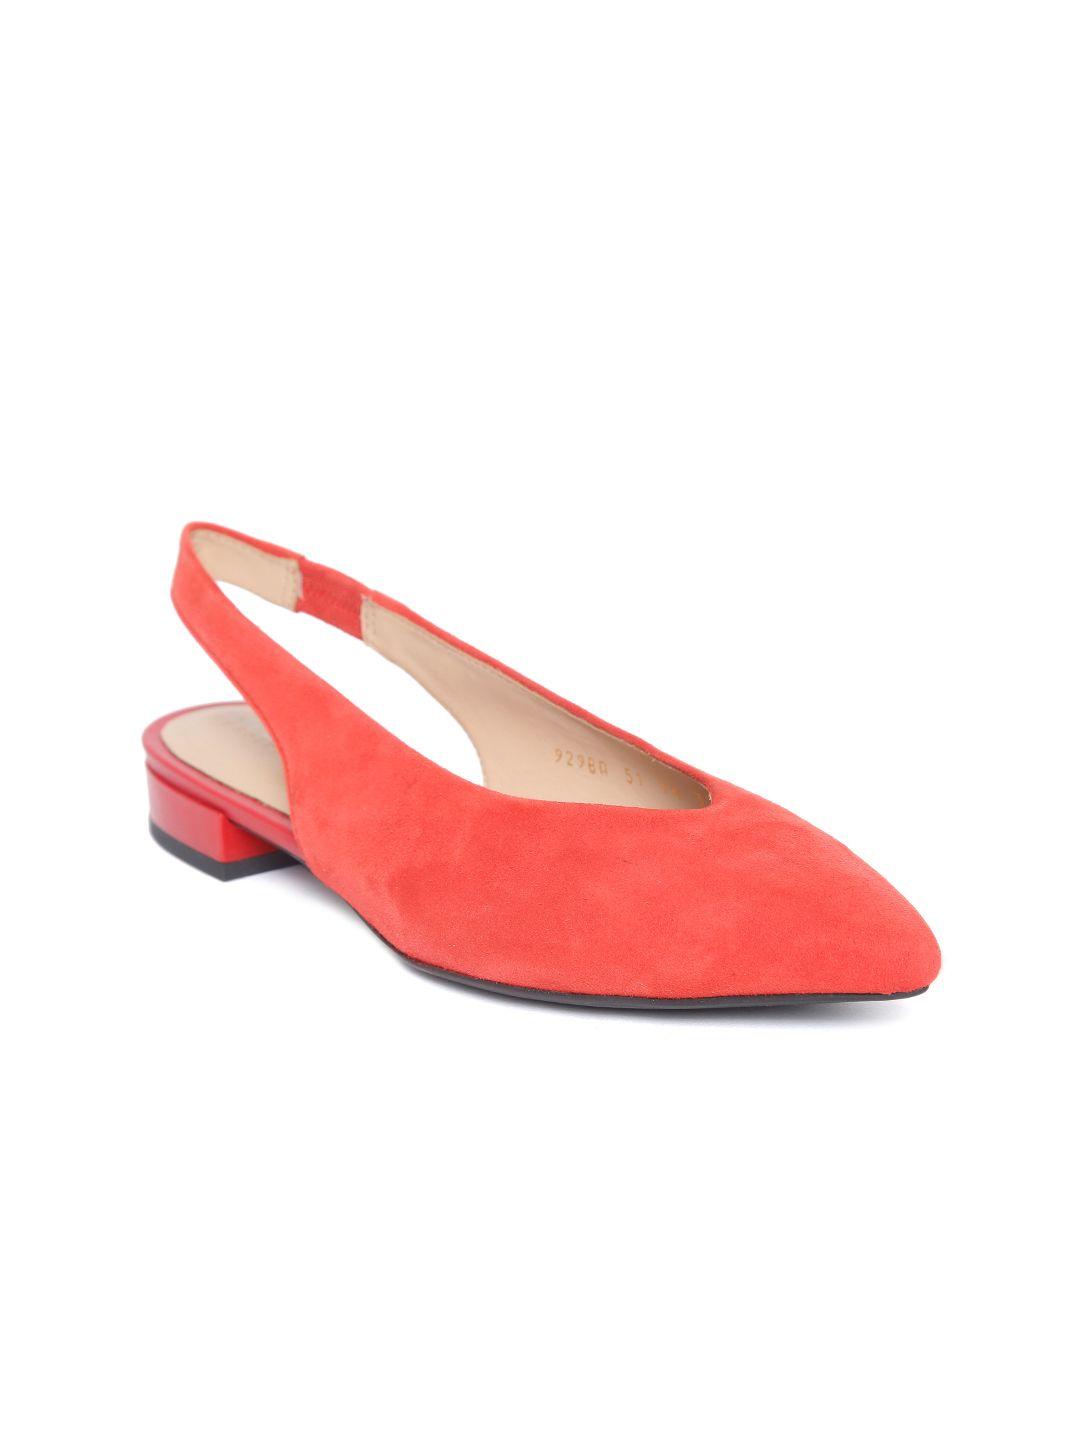 geox women coral red solid suede flats